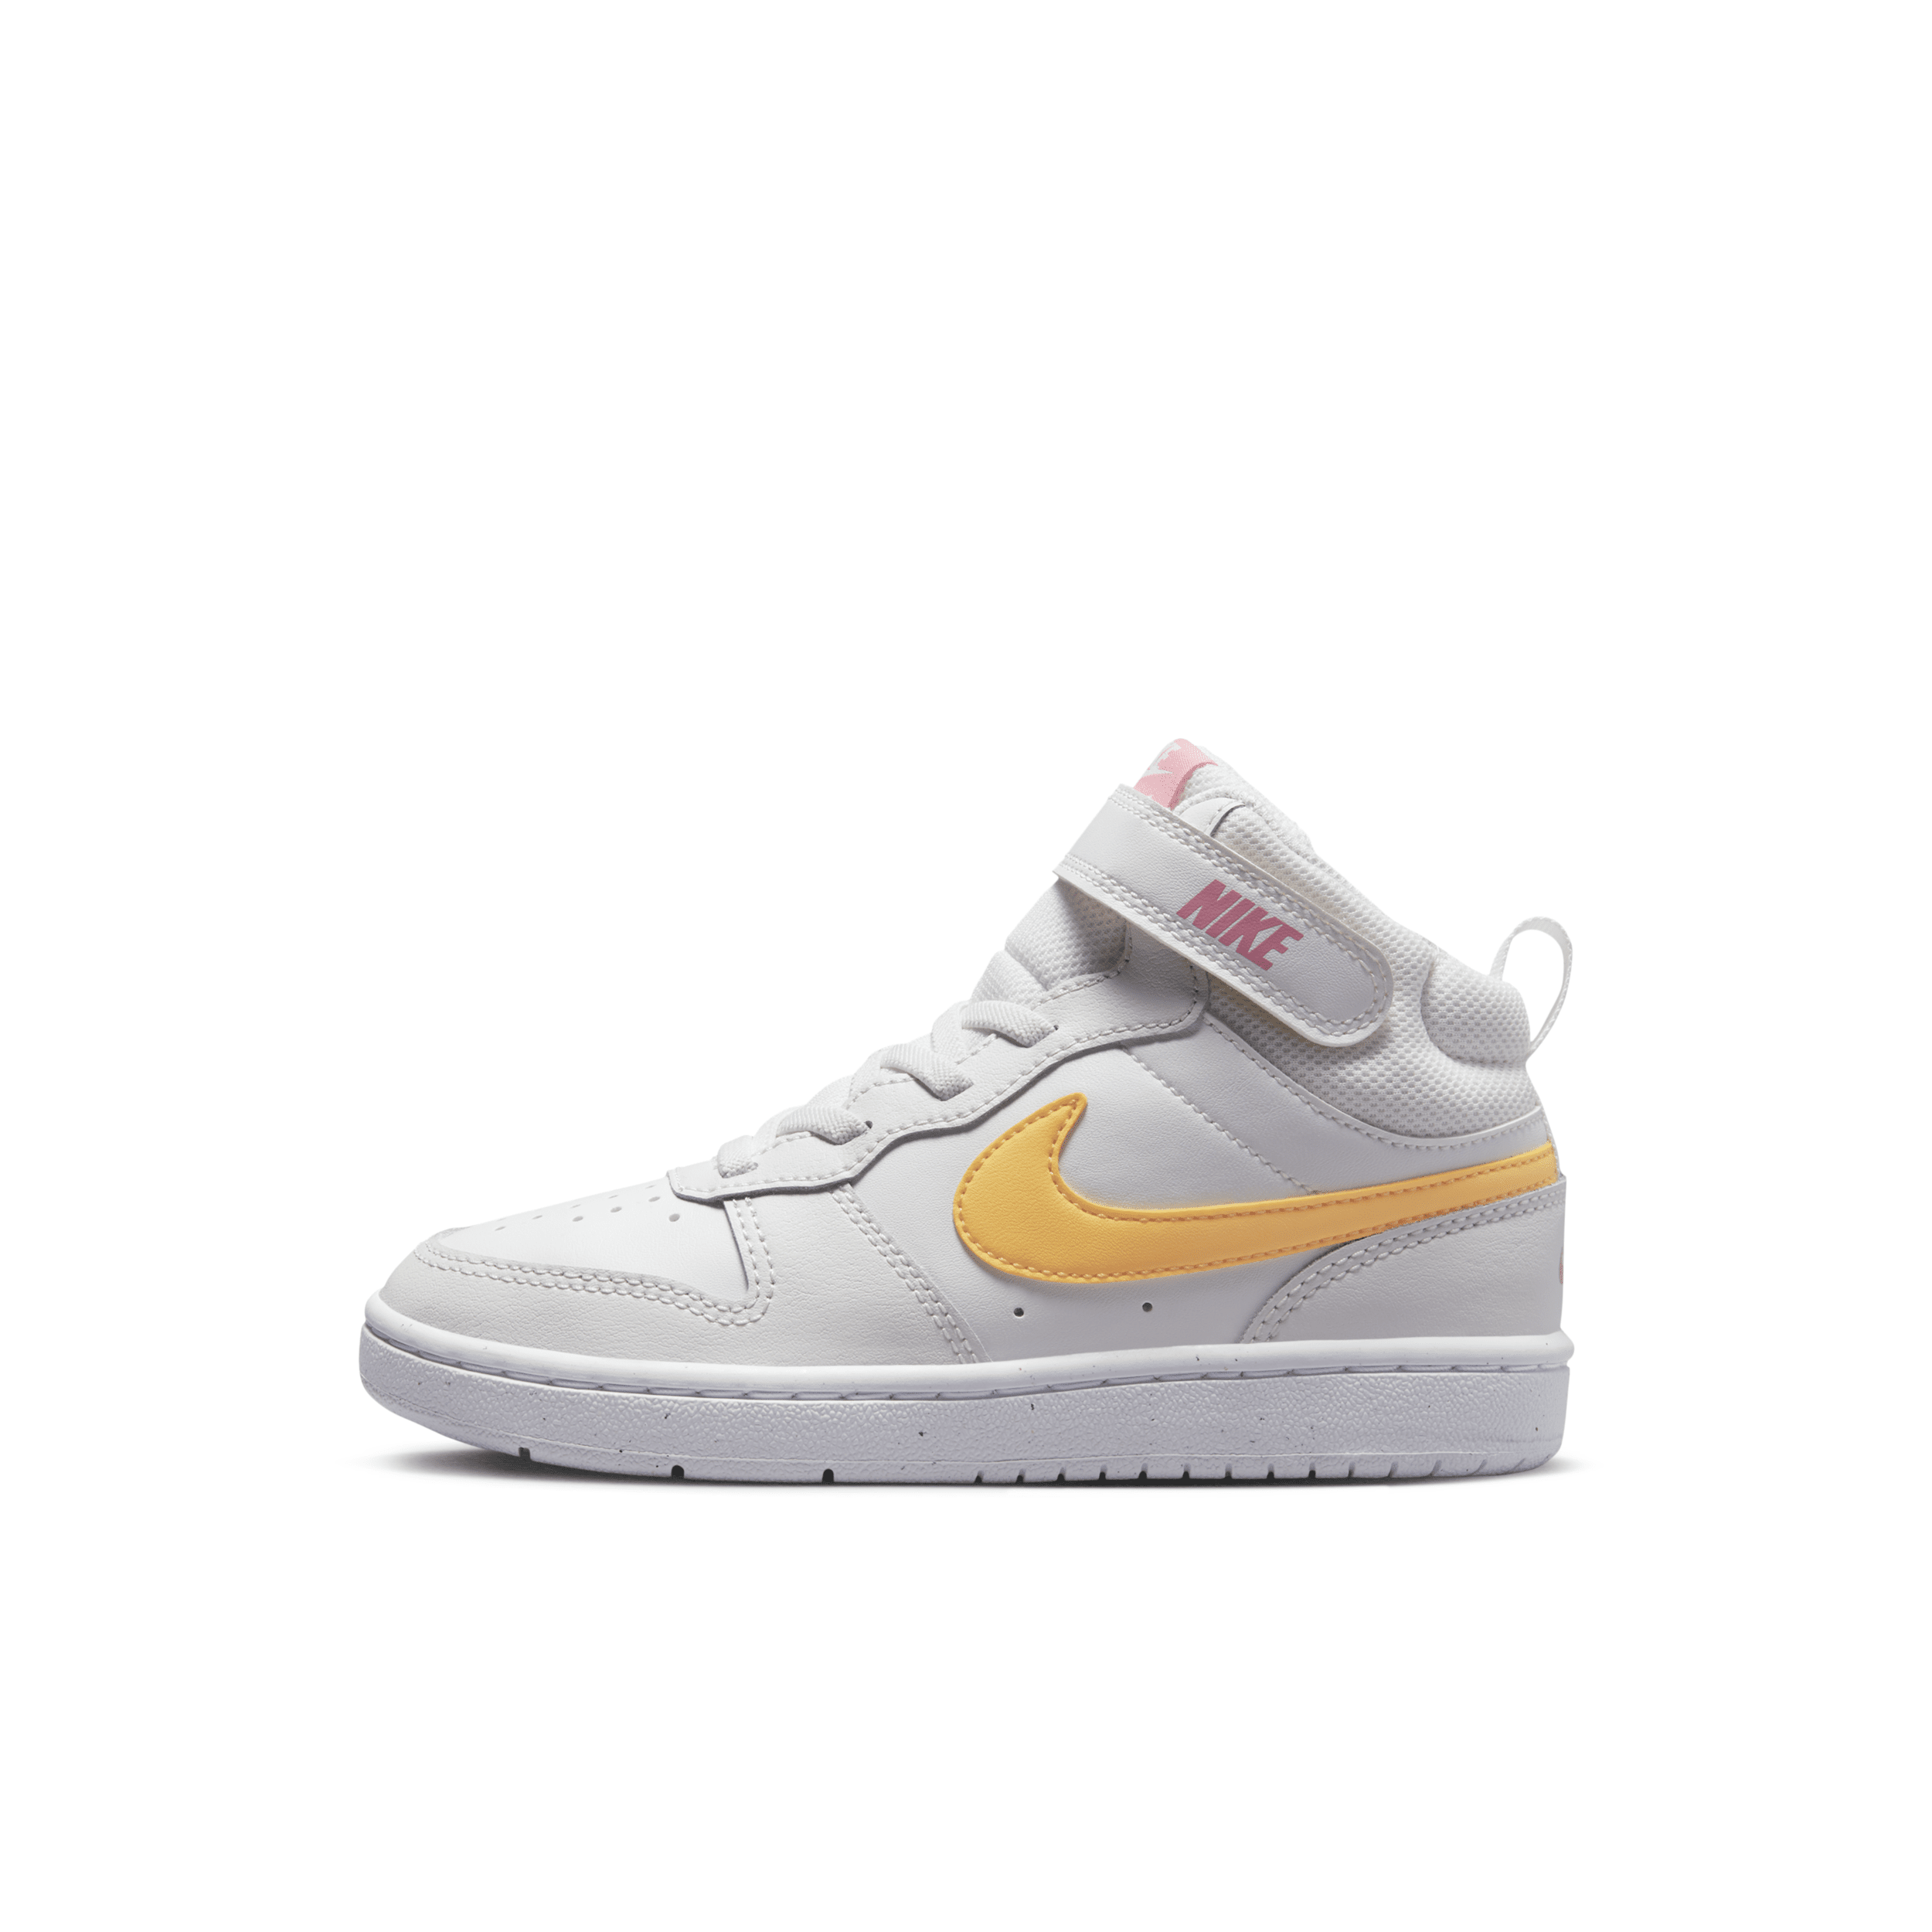 Nike Babies' Court Borough Mid 2 Little Kids' Shoes In White